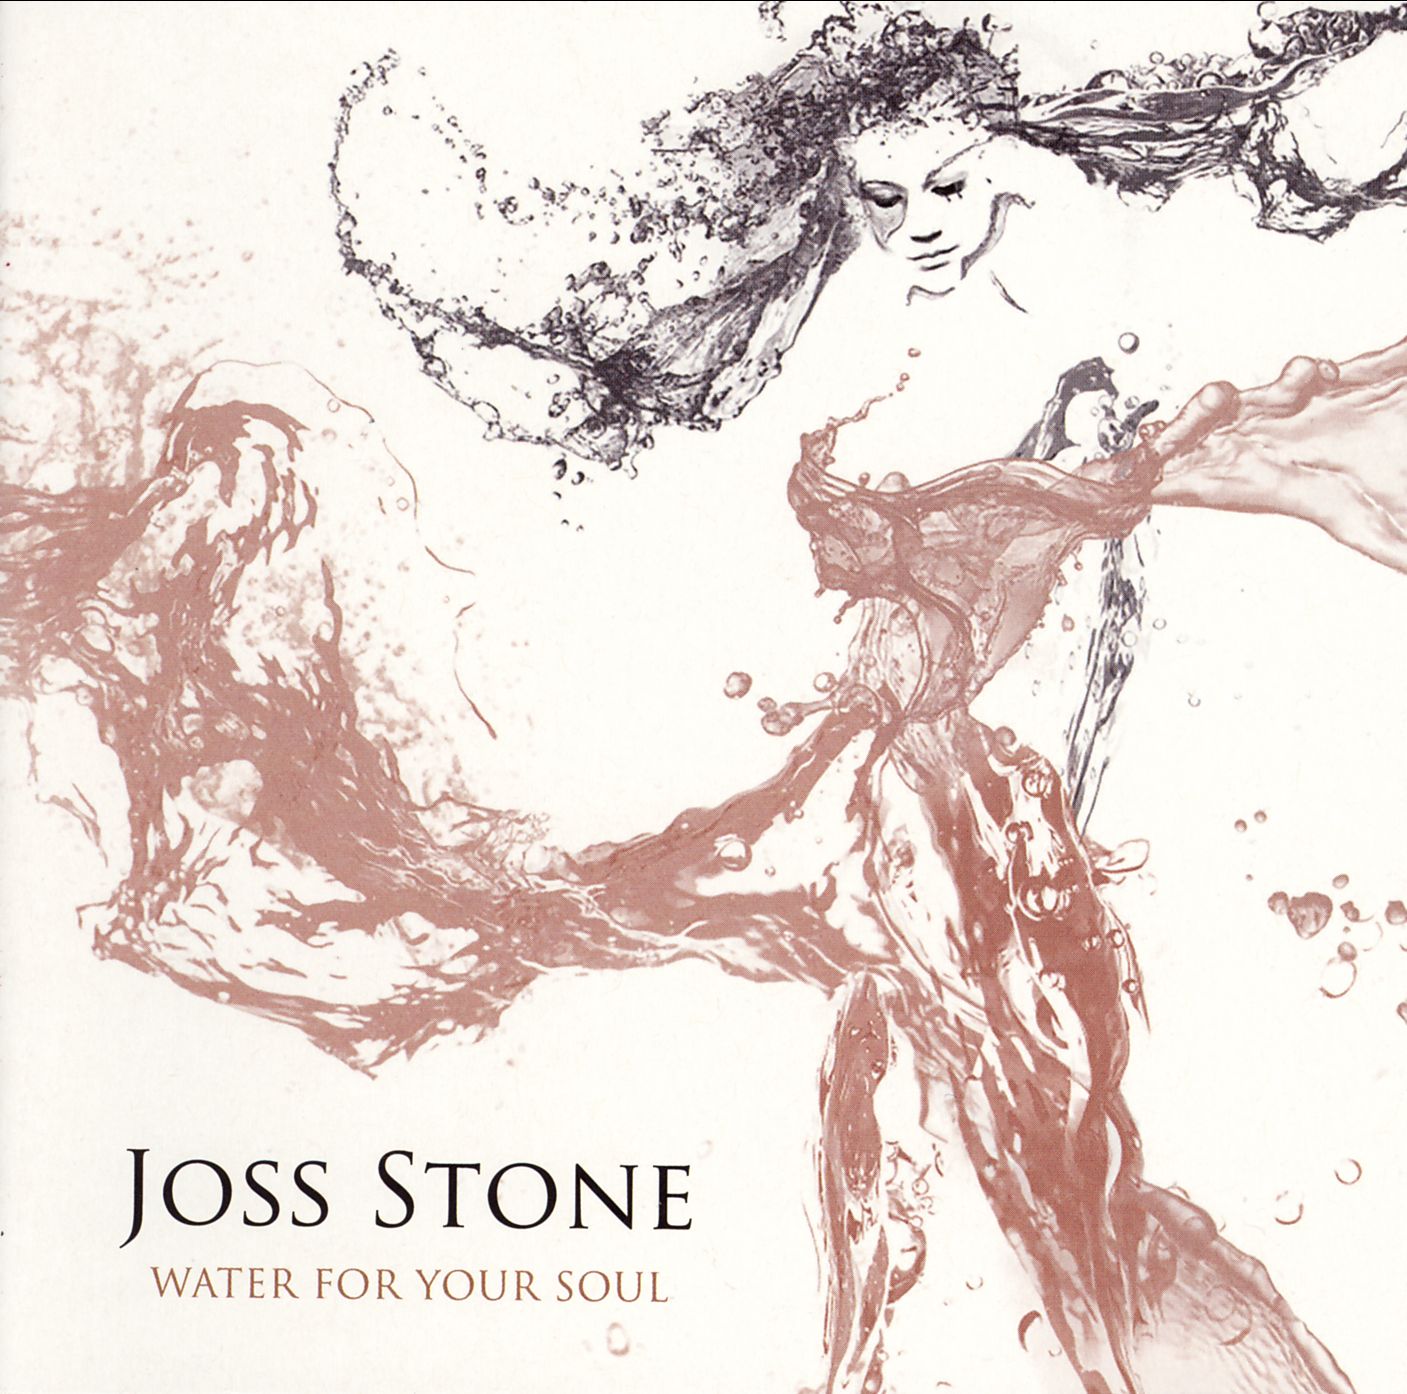 Joss Stone Water For Your Soul front.jpg.